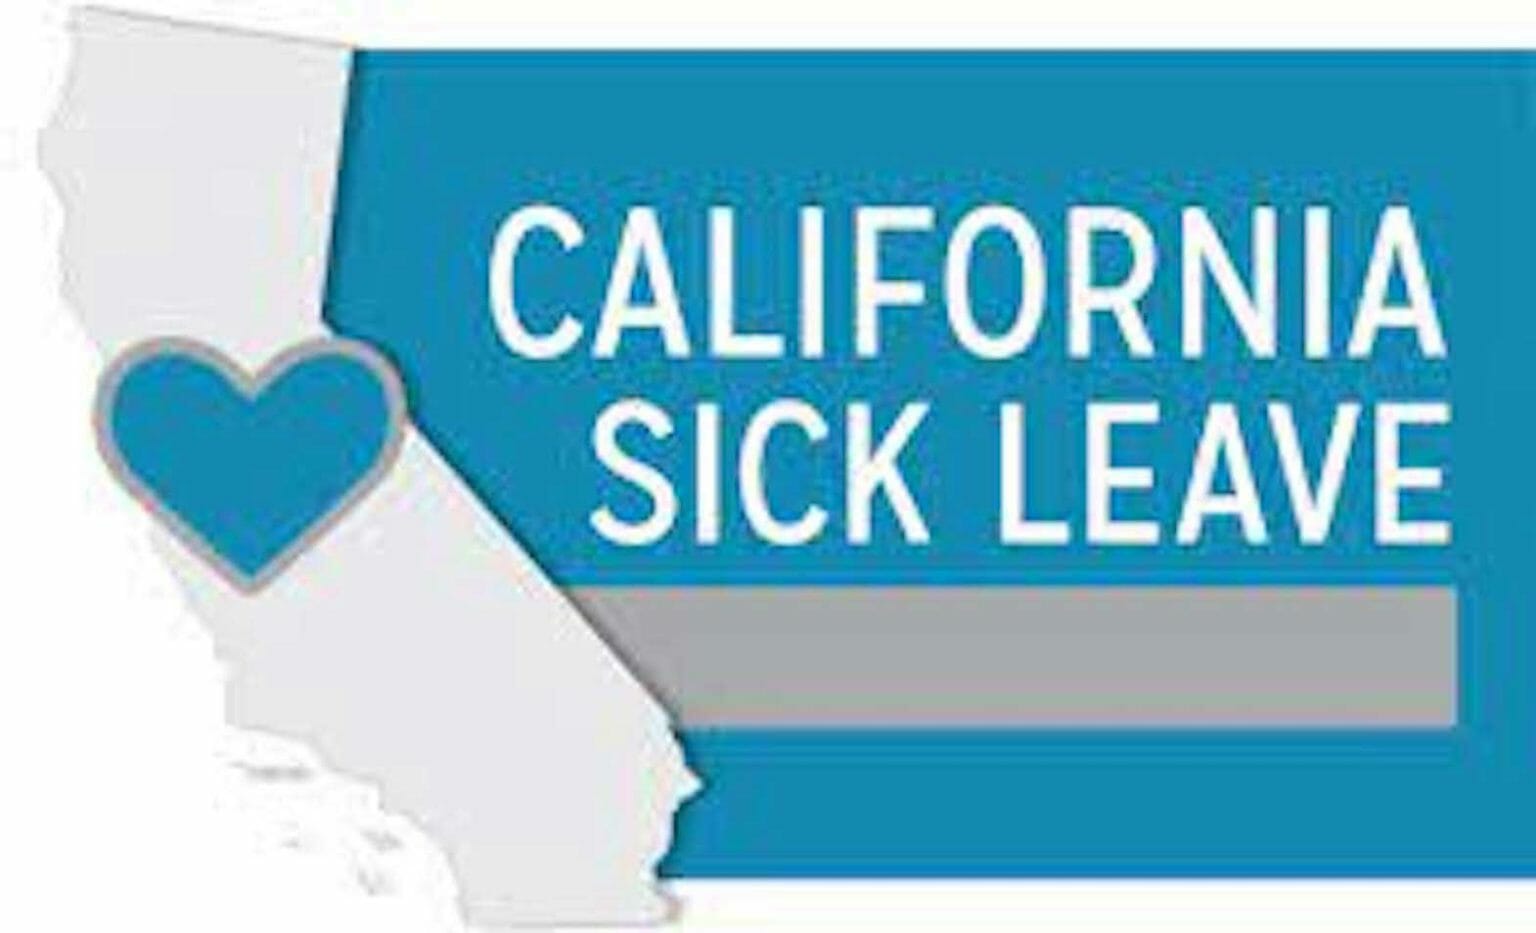 California workers may have more paid sick leave due to Covid surge